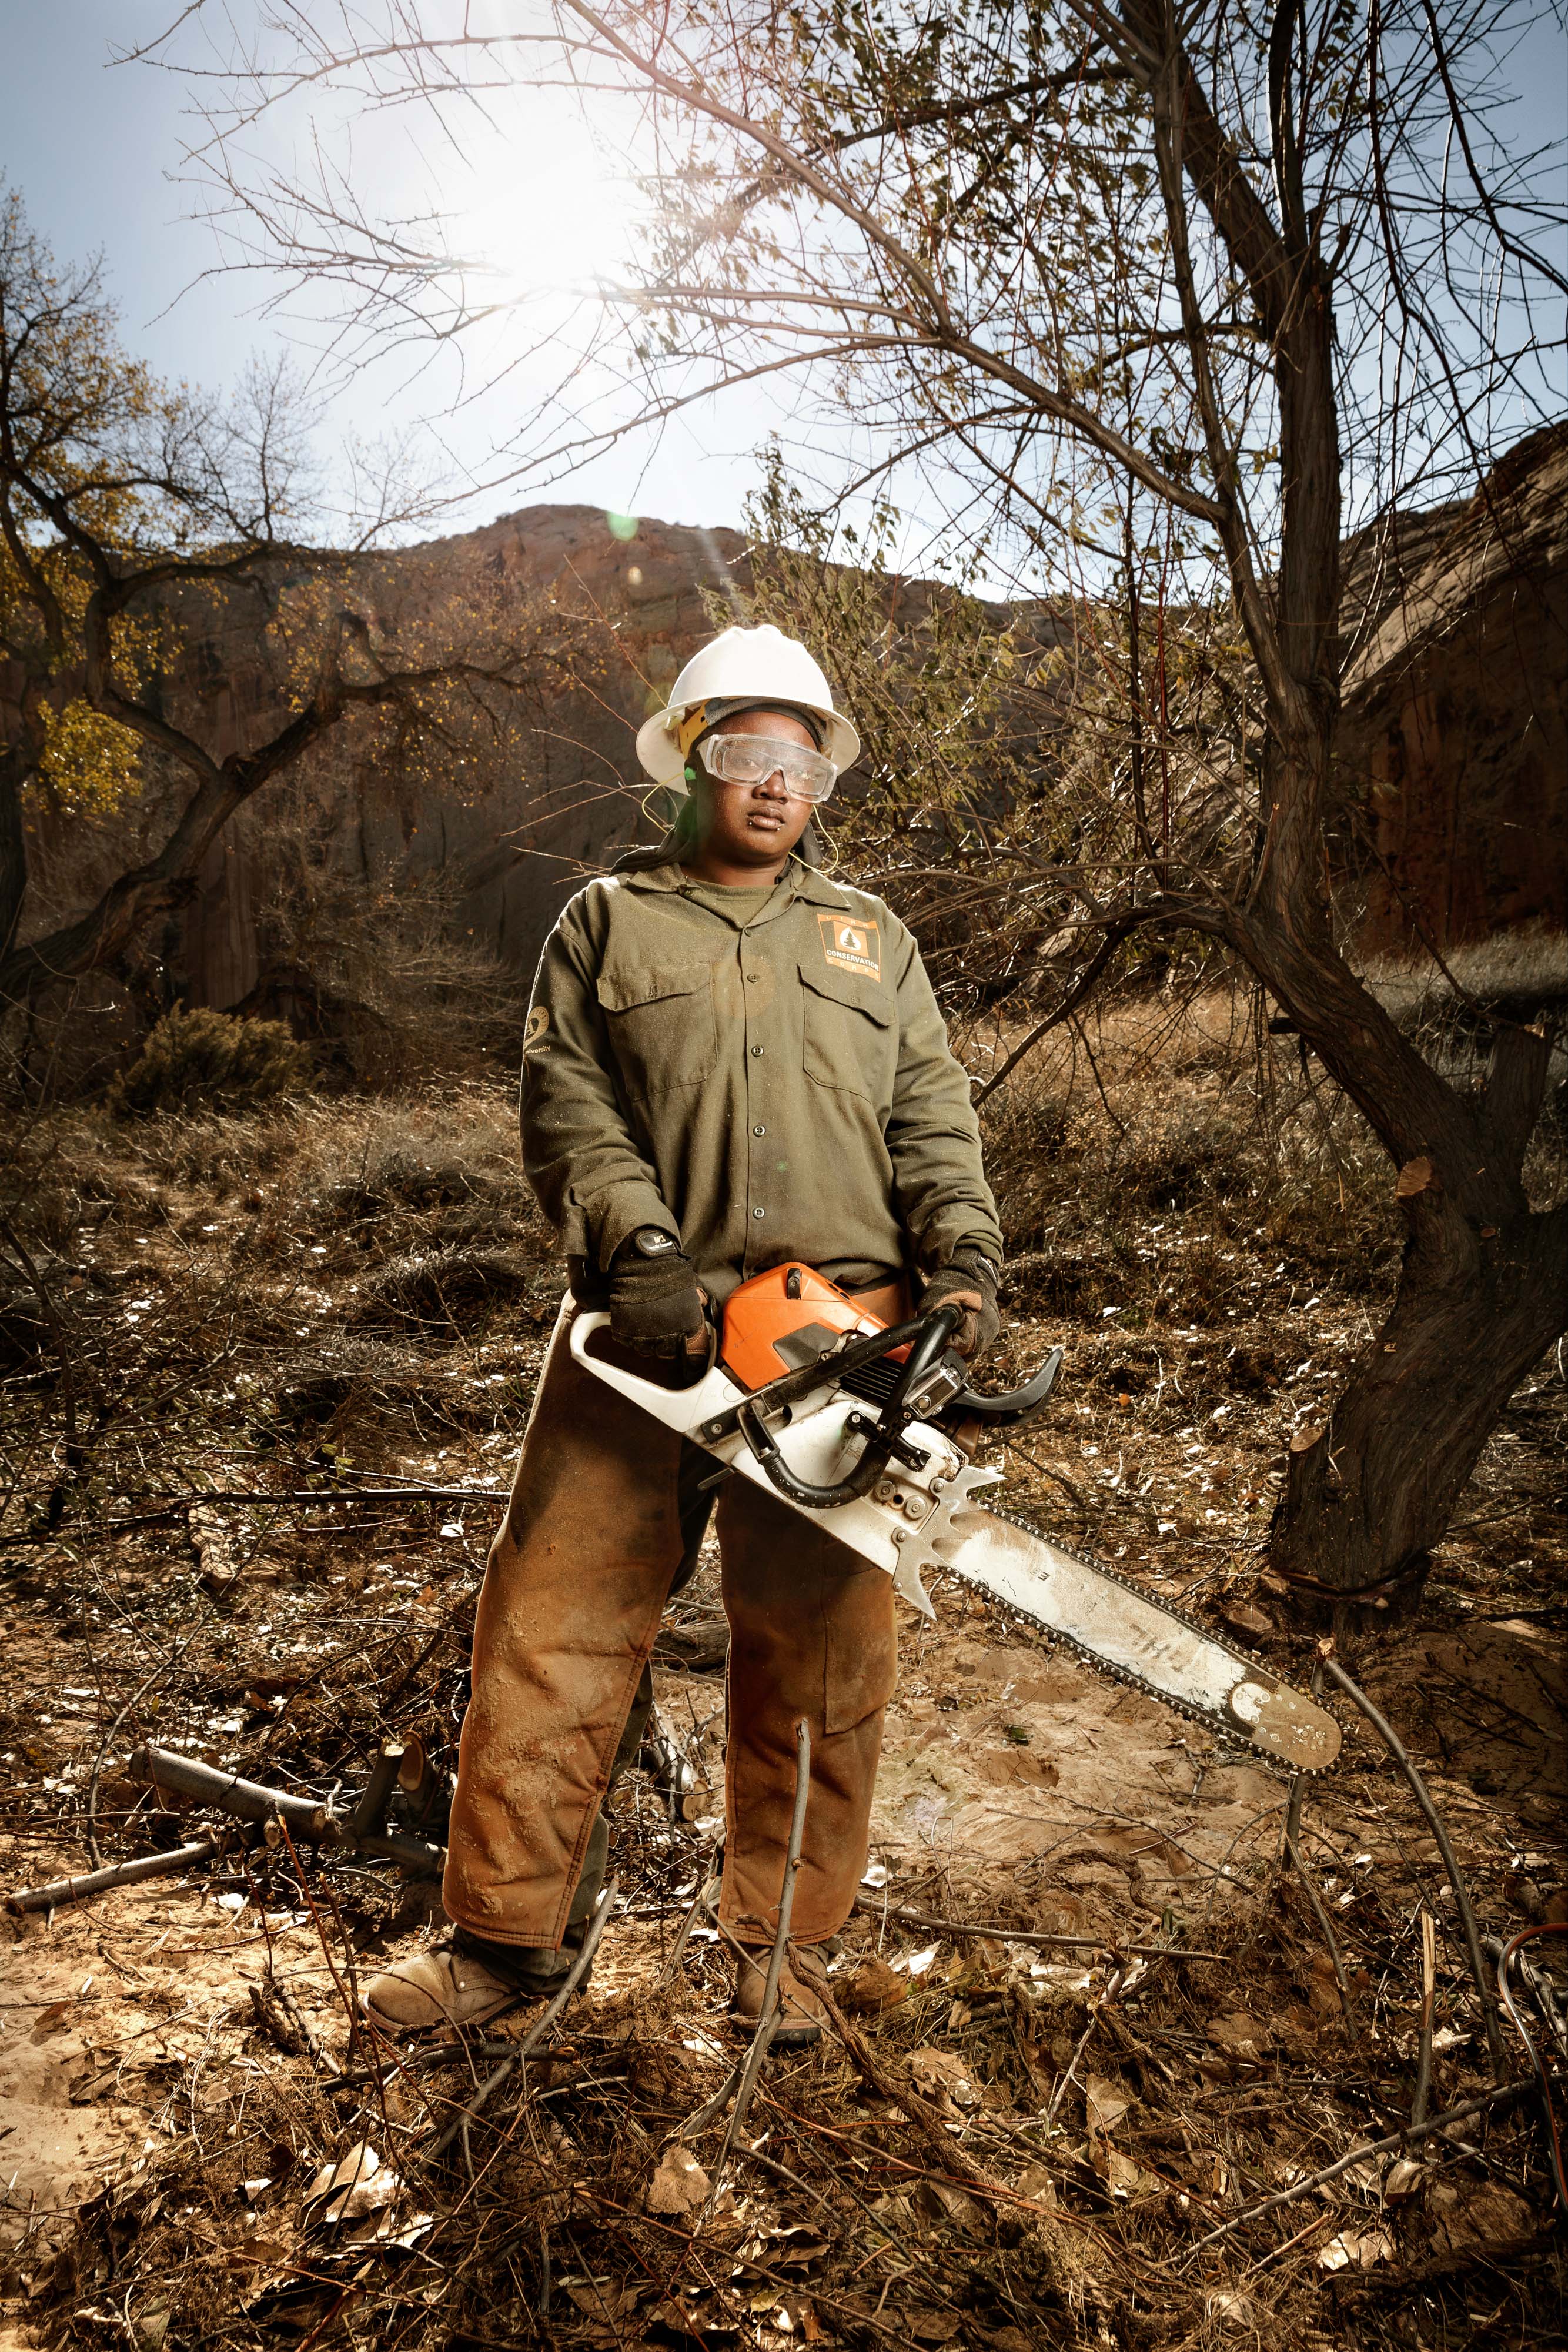 A young black woman in protective clothing with safety glasses and helmet, holding a chainsaw and looking at the camera.